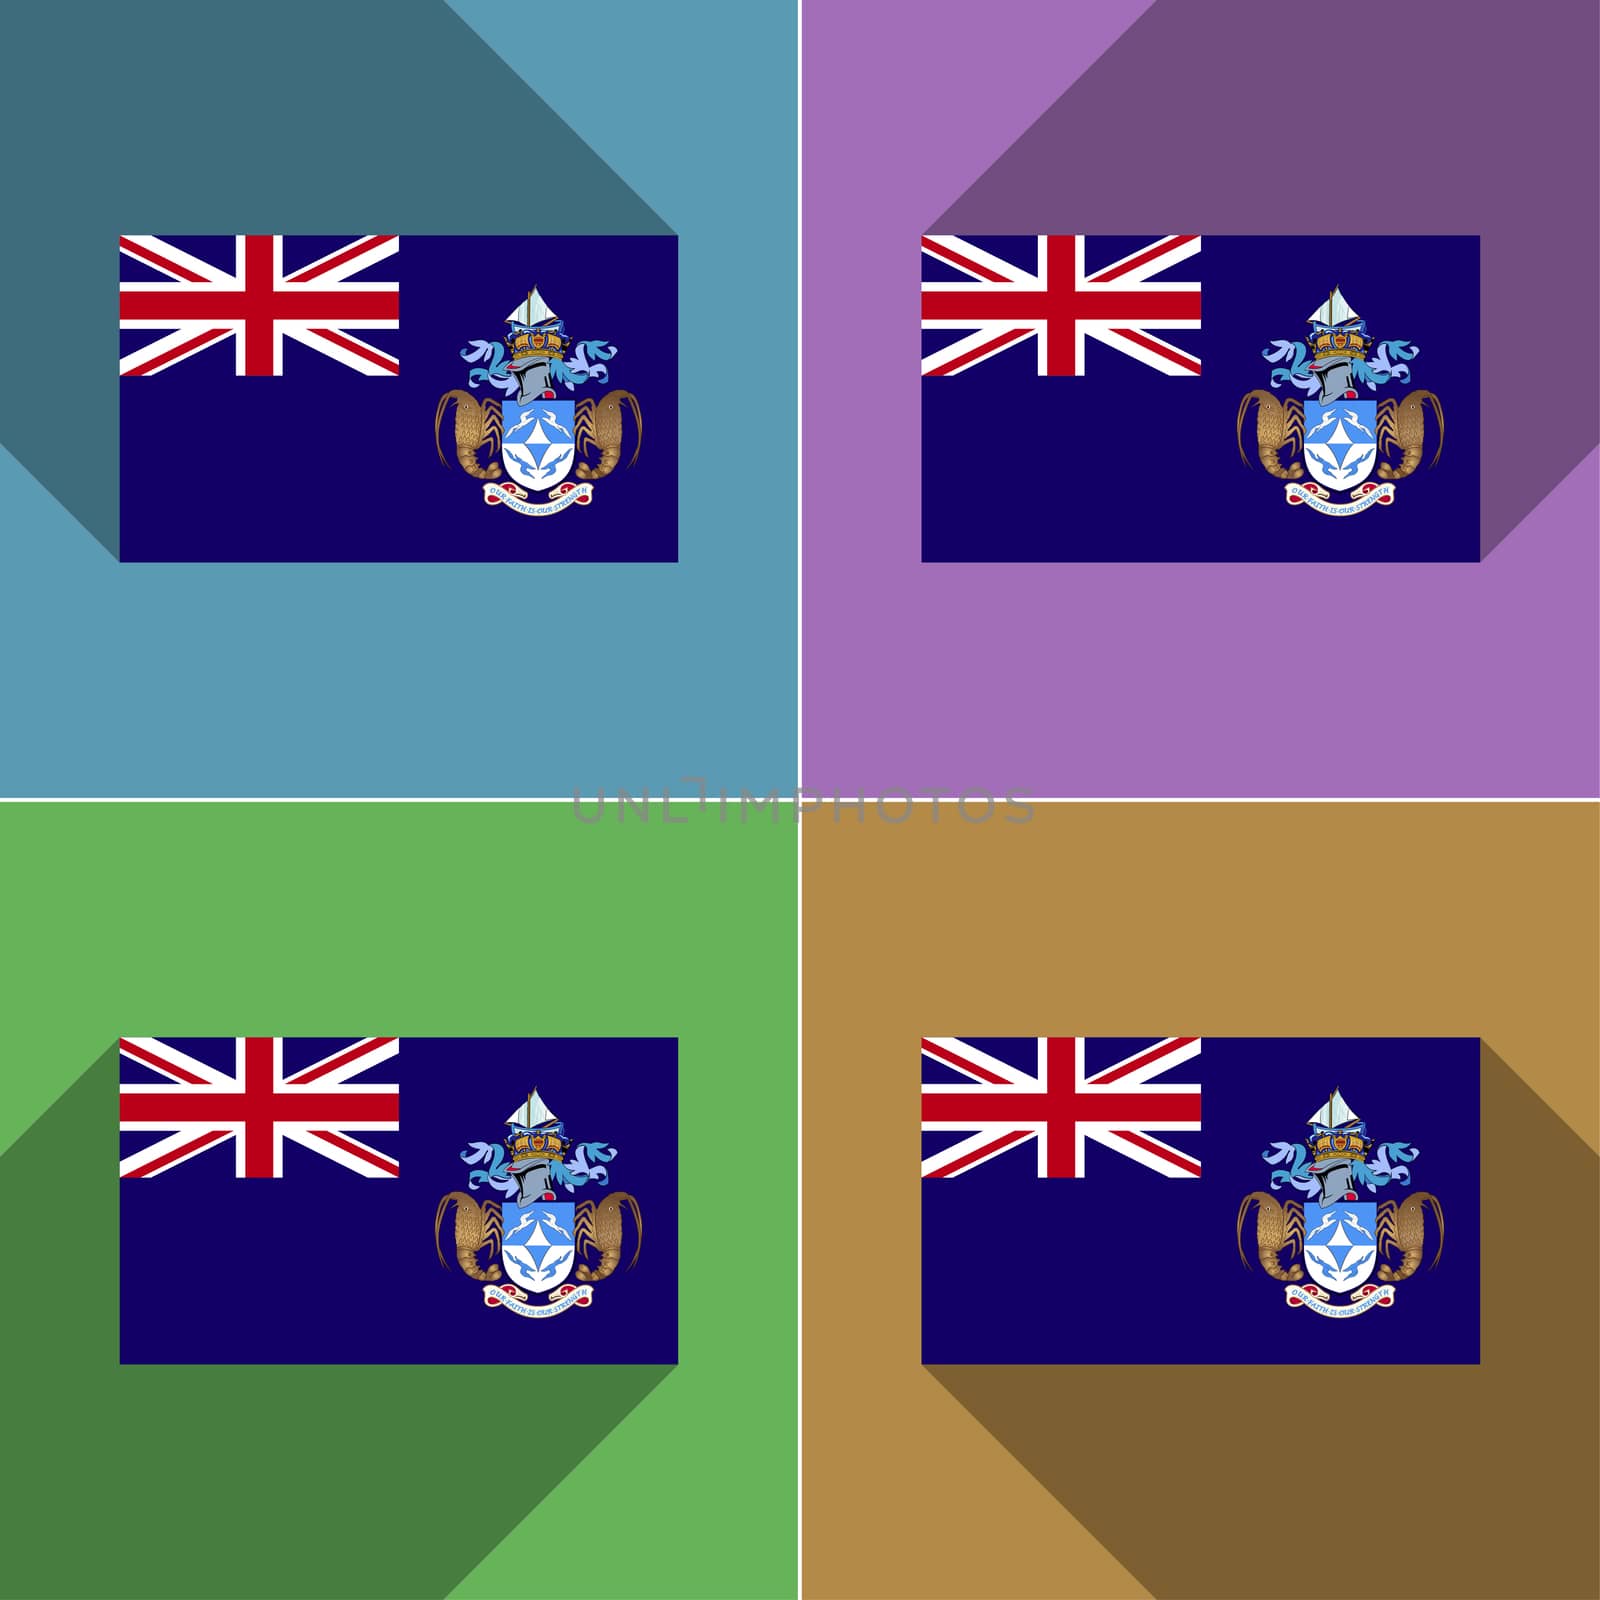 Flags of Tristan da Cunha. Set of colors flat design and long shadows.  illustration